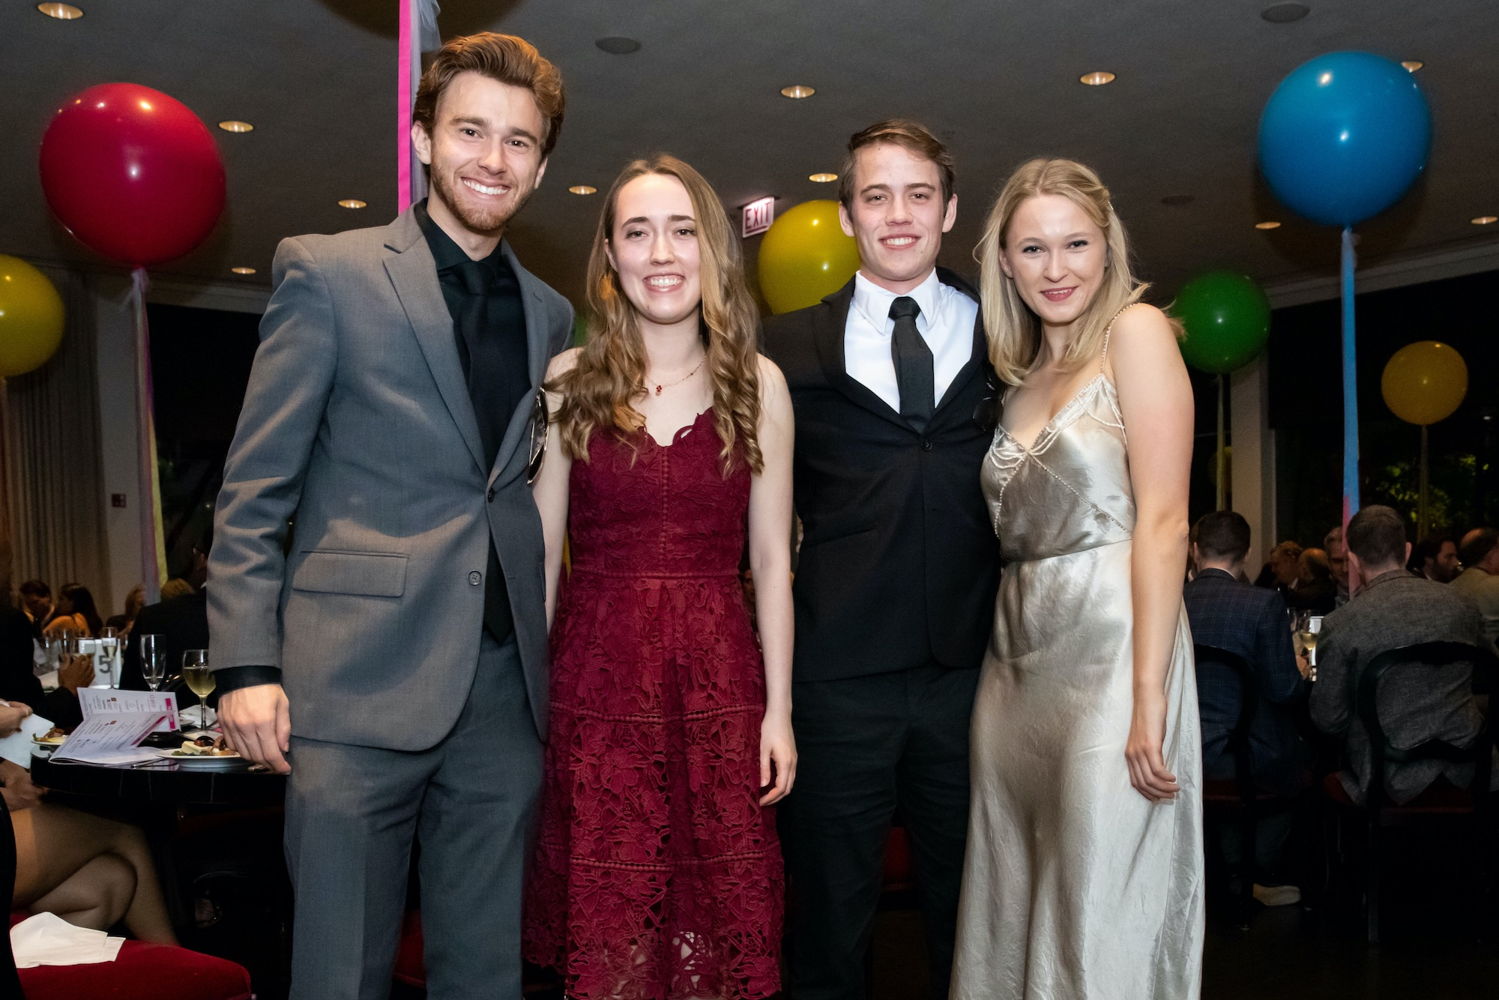 Alexander Carroll, Christina White, Nathan White, Elizabeth Carroll; Photo by Laurie Fanelli